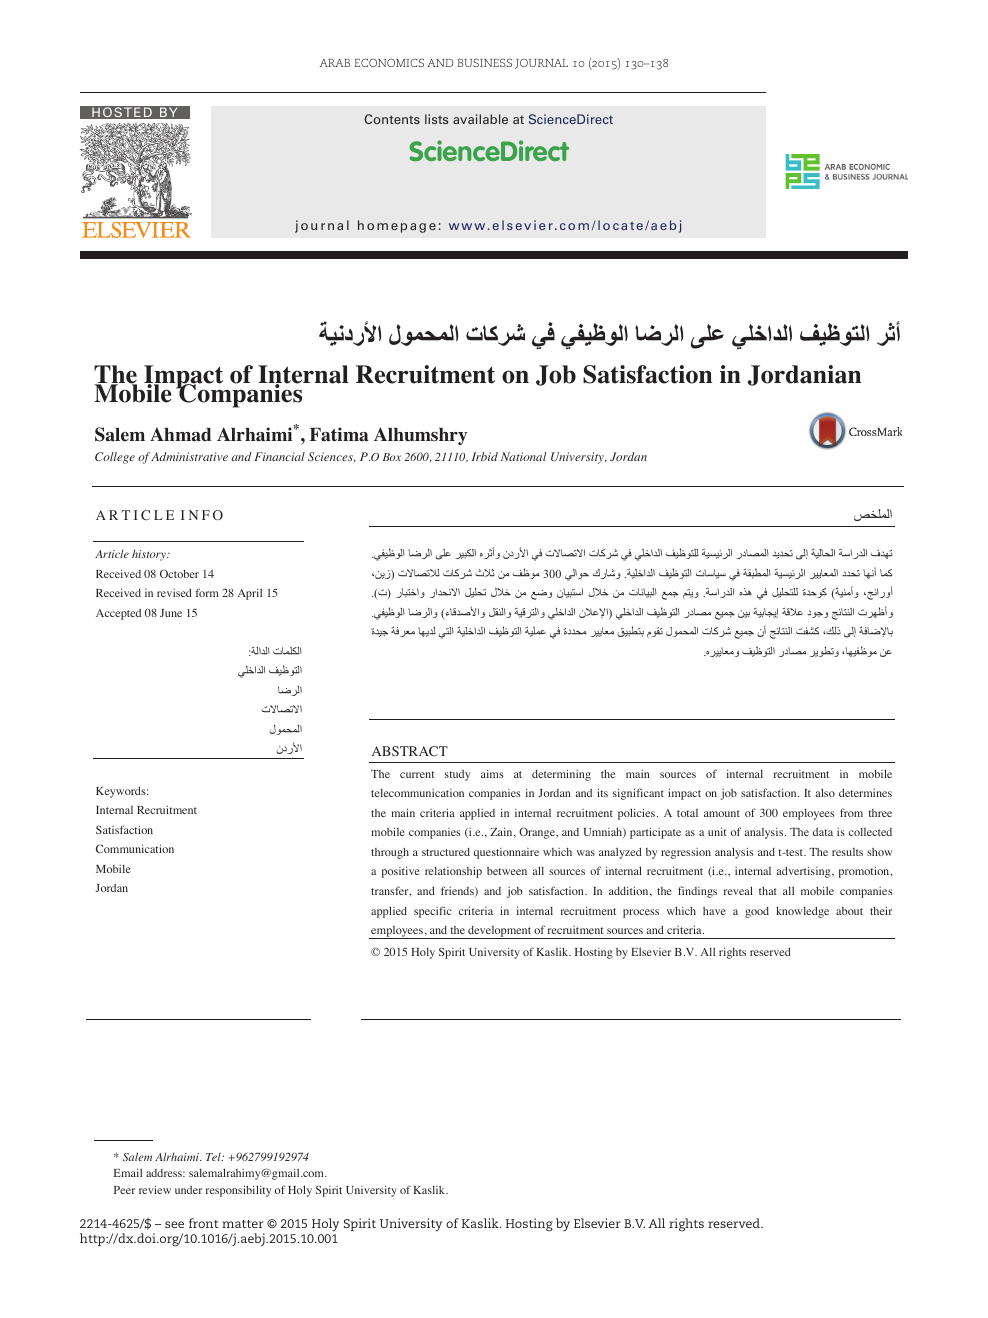 The Impact Of Internal Recruitment On Job Satisfaction In Jordanian Mobile Companies Topic Of Research Paper In Economics And Business Download Scholarly Article Pdf And Read For Free On Cyberleninka Open